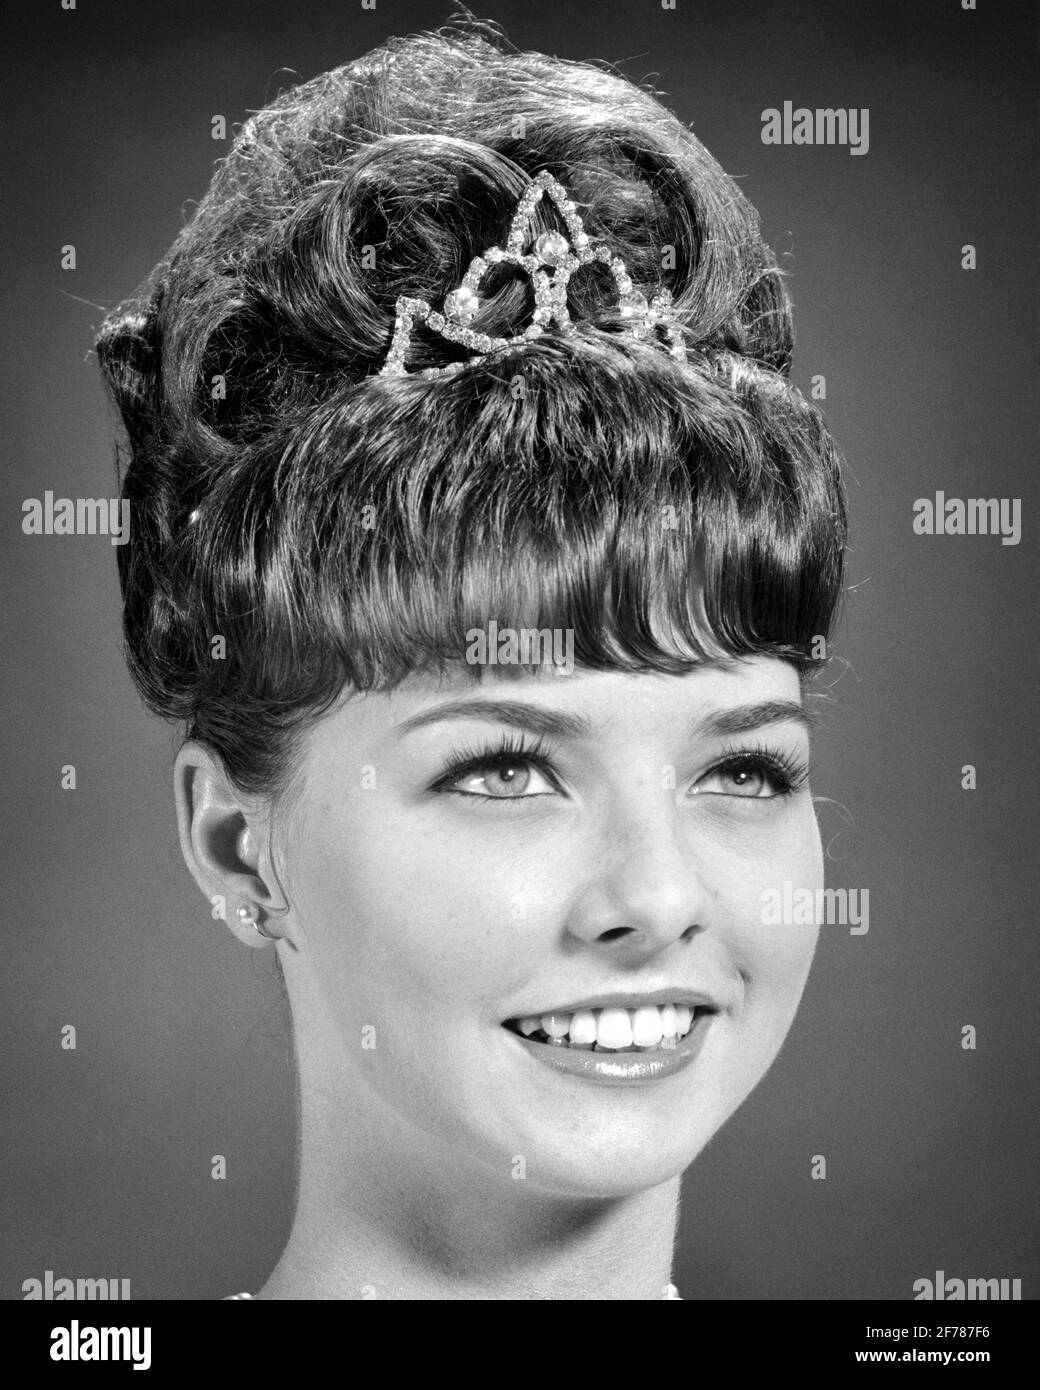 The Elegant 1960 Bee Hive Hair Style  How to Recreate It Today  Chick  About Town